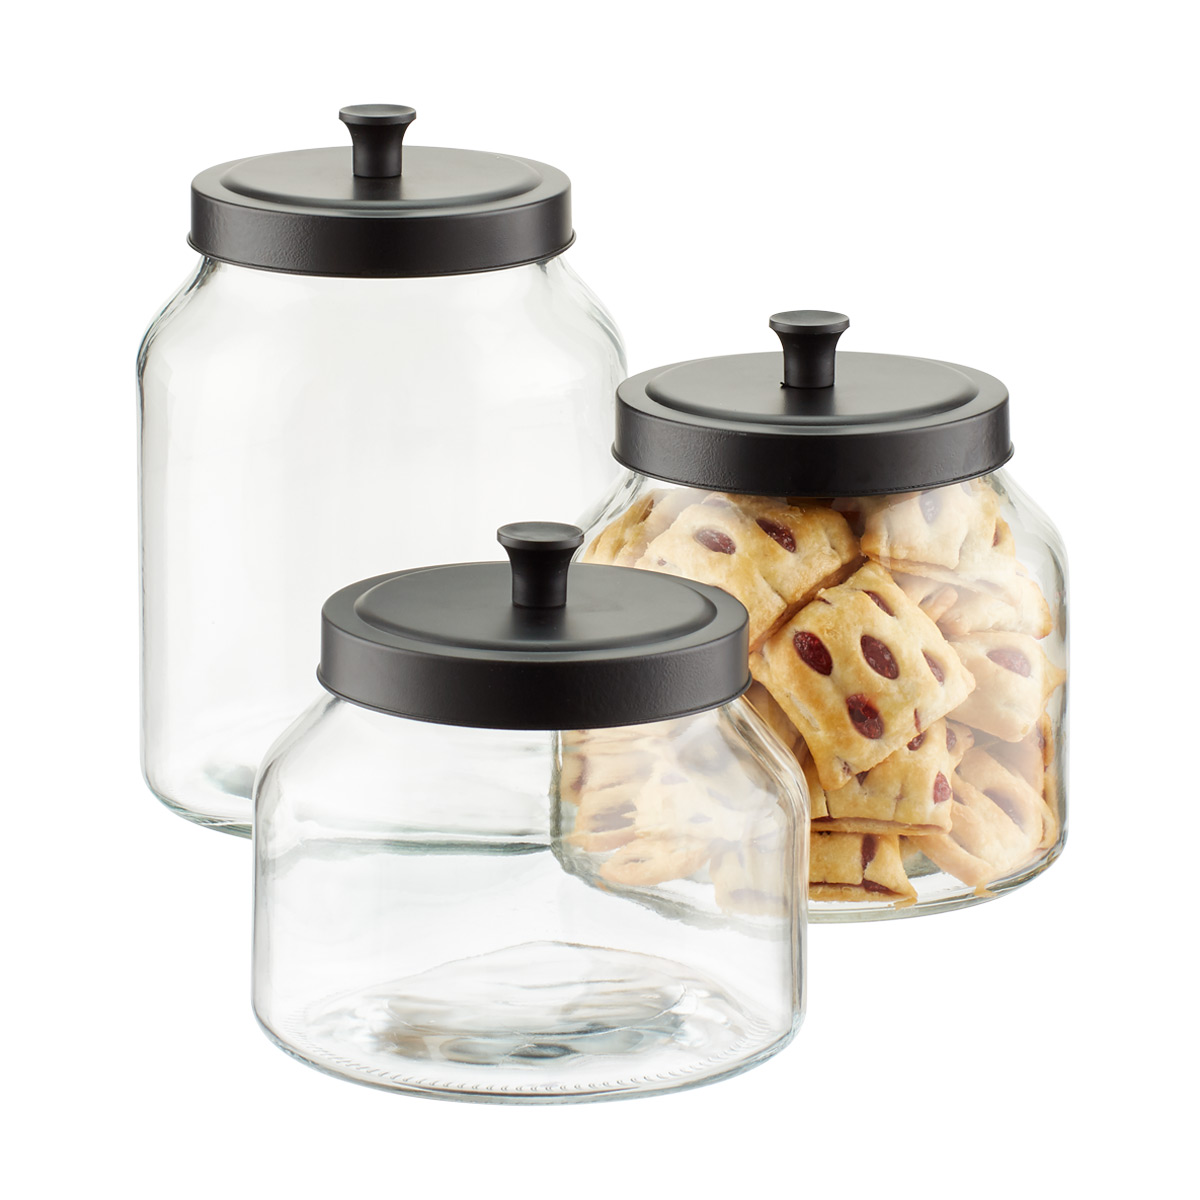 https://www.containerstore.com/catalogimages/344202/10074985g-glass-canister-matte-black.jpg